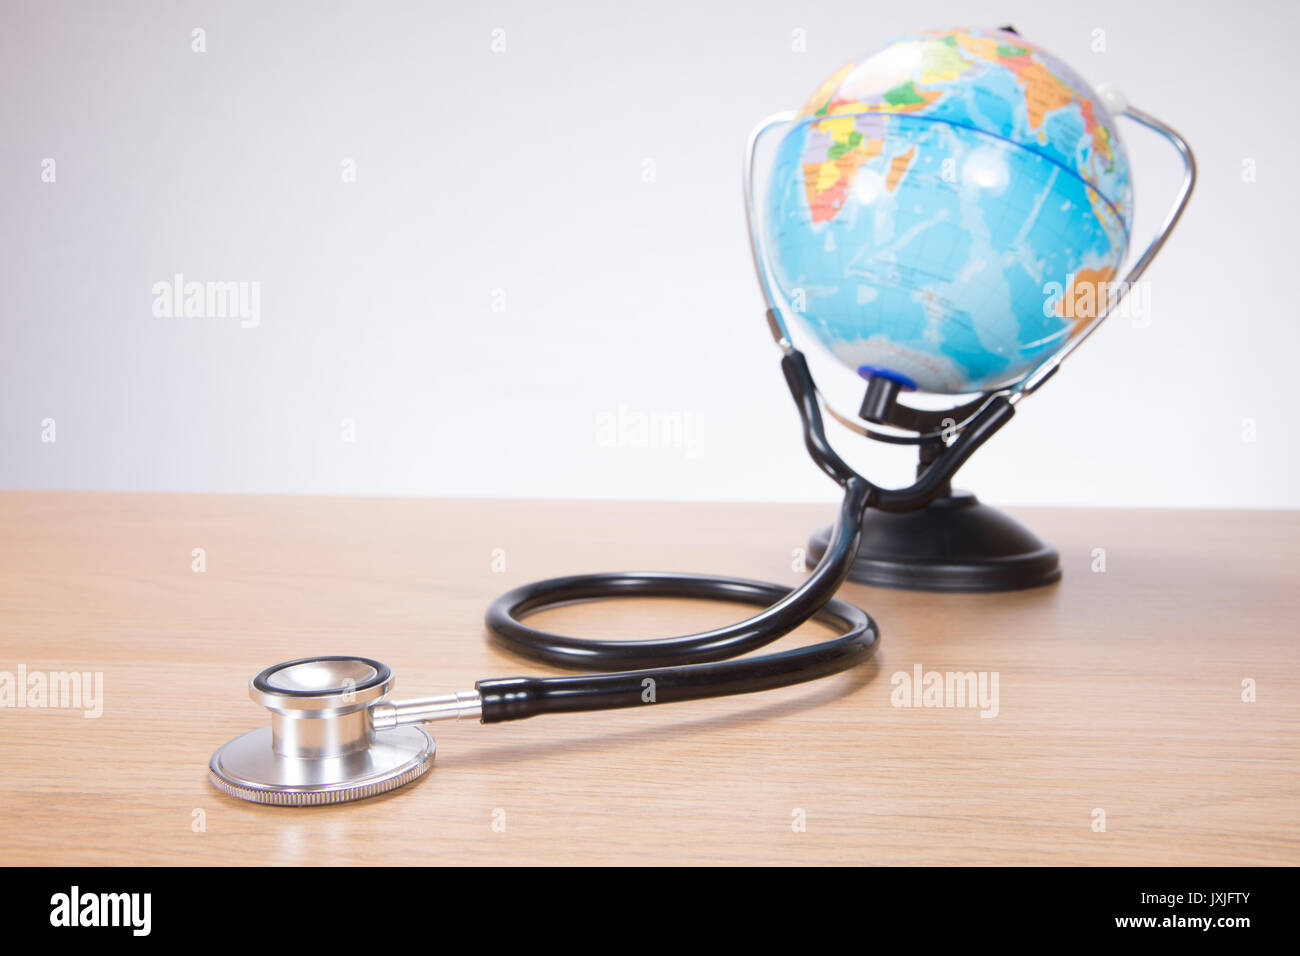 Small miniature toy plastic globe with stethoscope attached Stock Photo